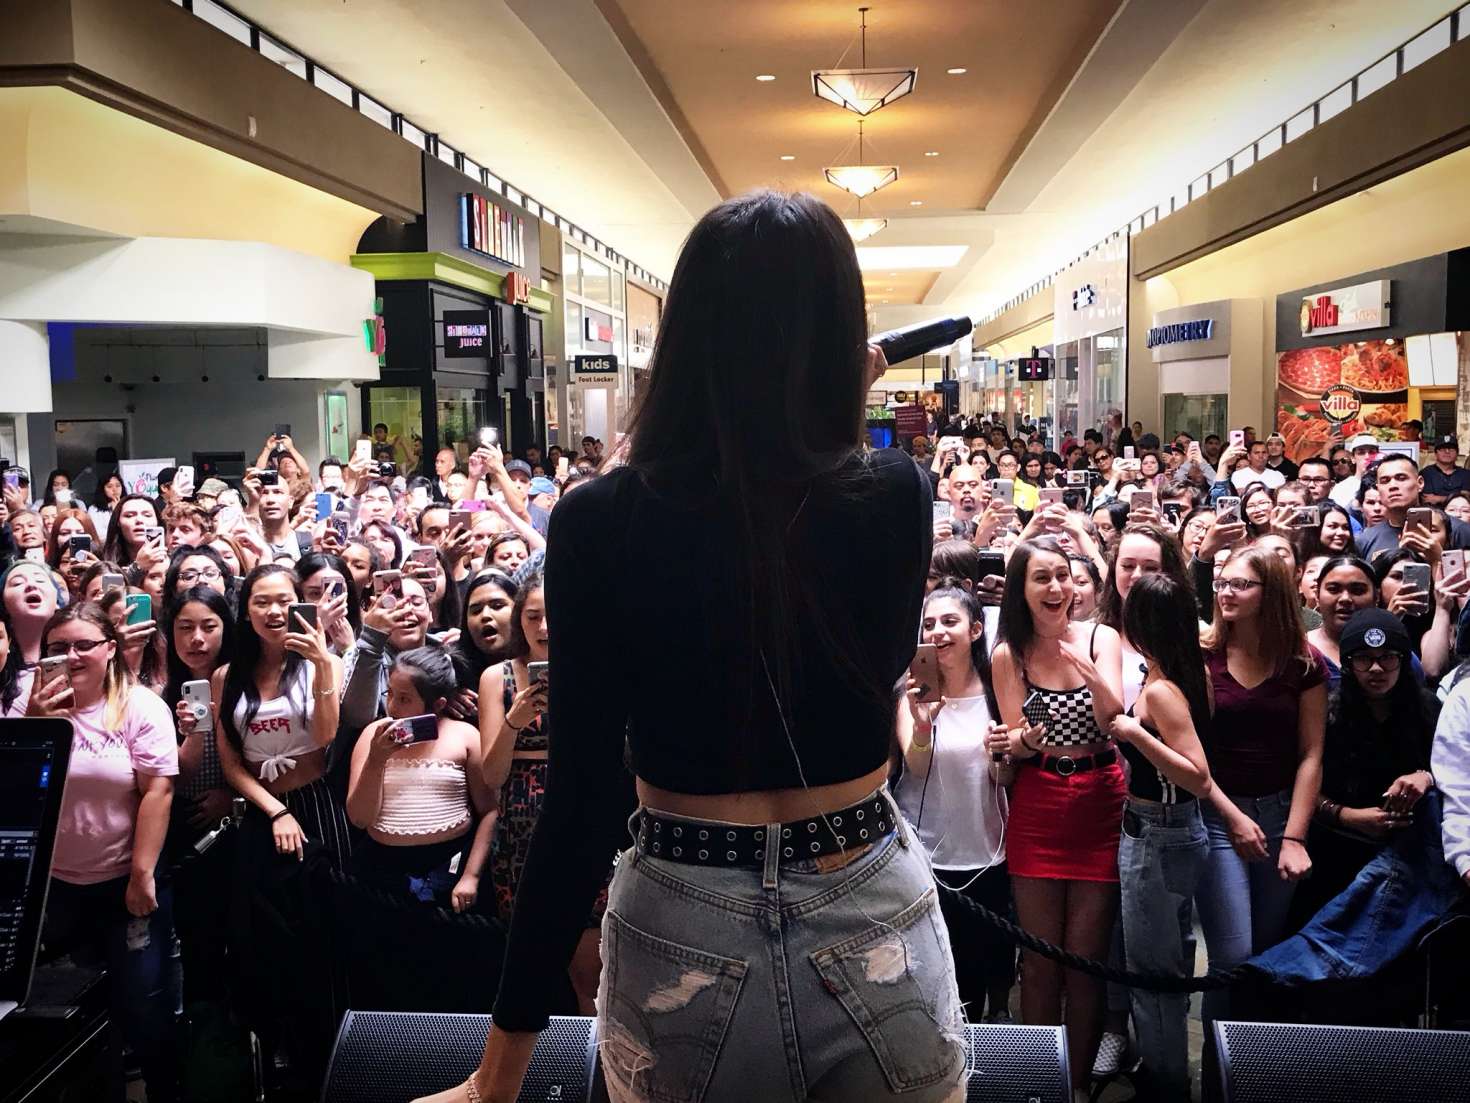 Madison Beer â€“ Live Performance at Serramonte in Daly City